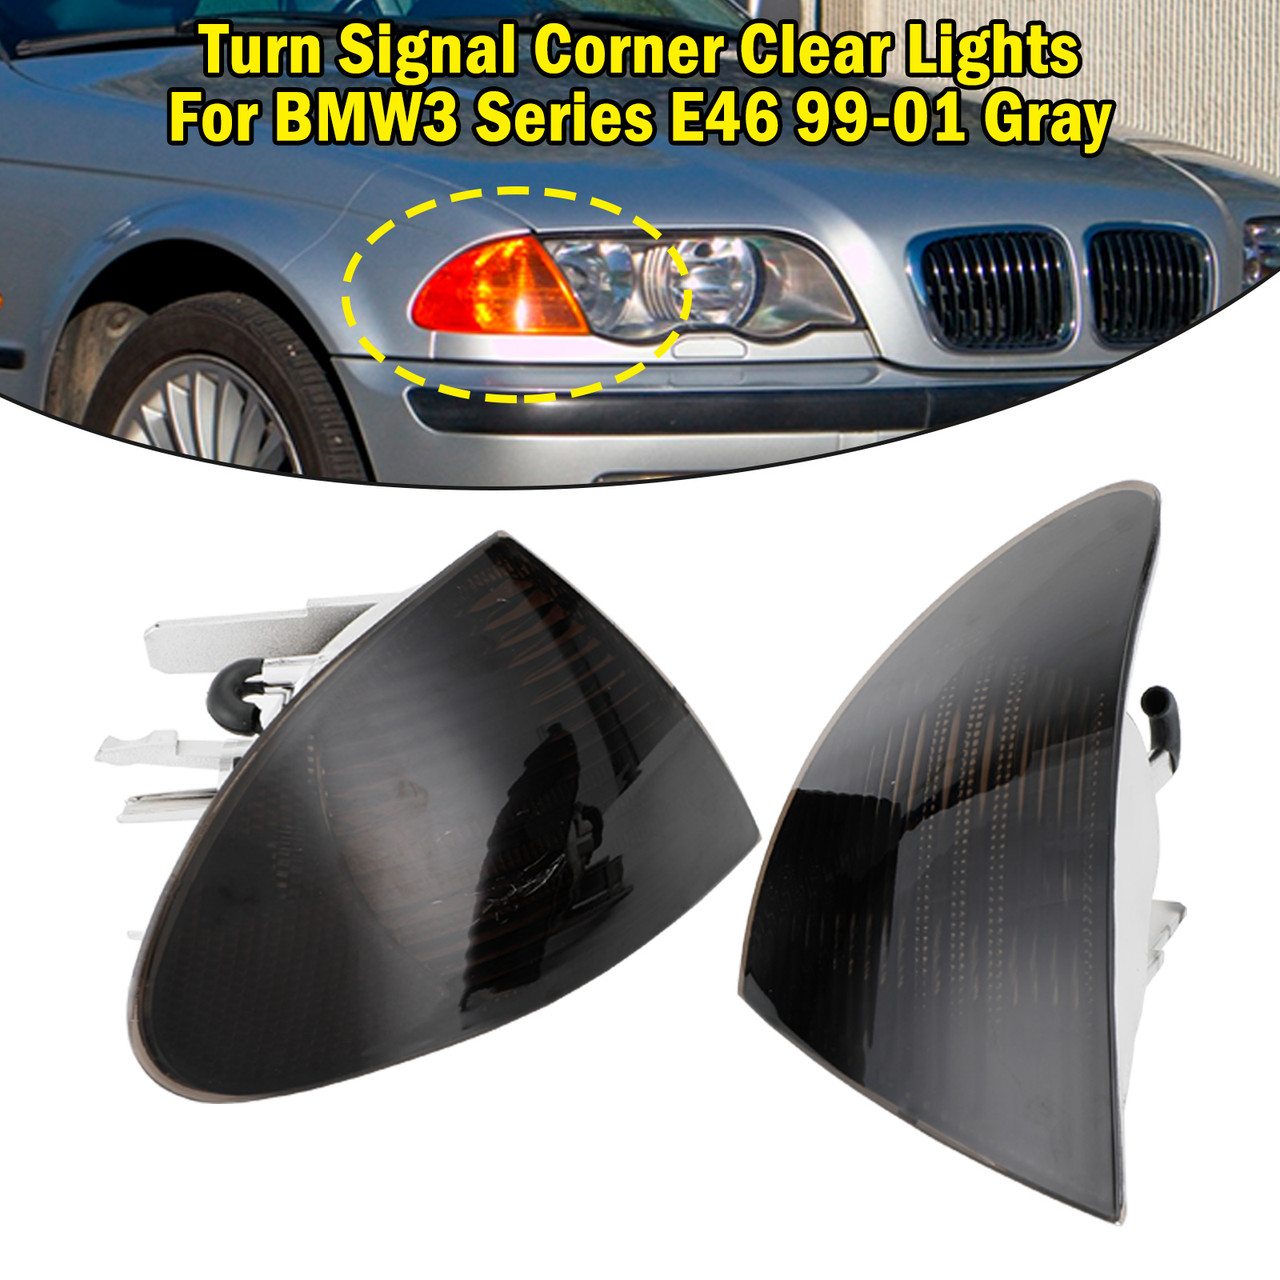 Turn Signal Corner Corner Clear Lights Fit For BMW 3 Series E46 99-01 Gray